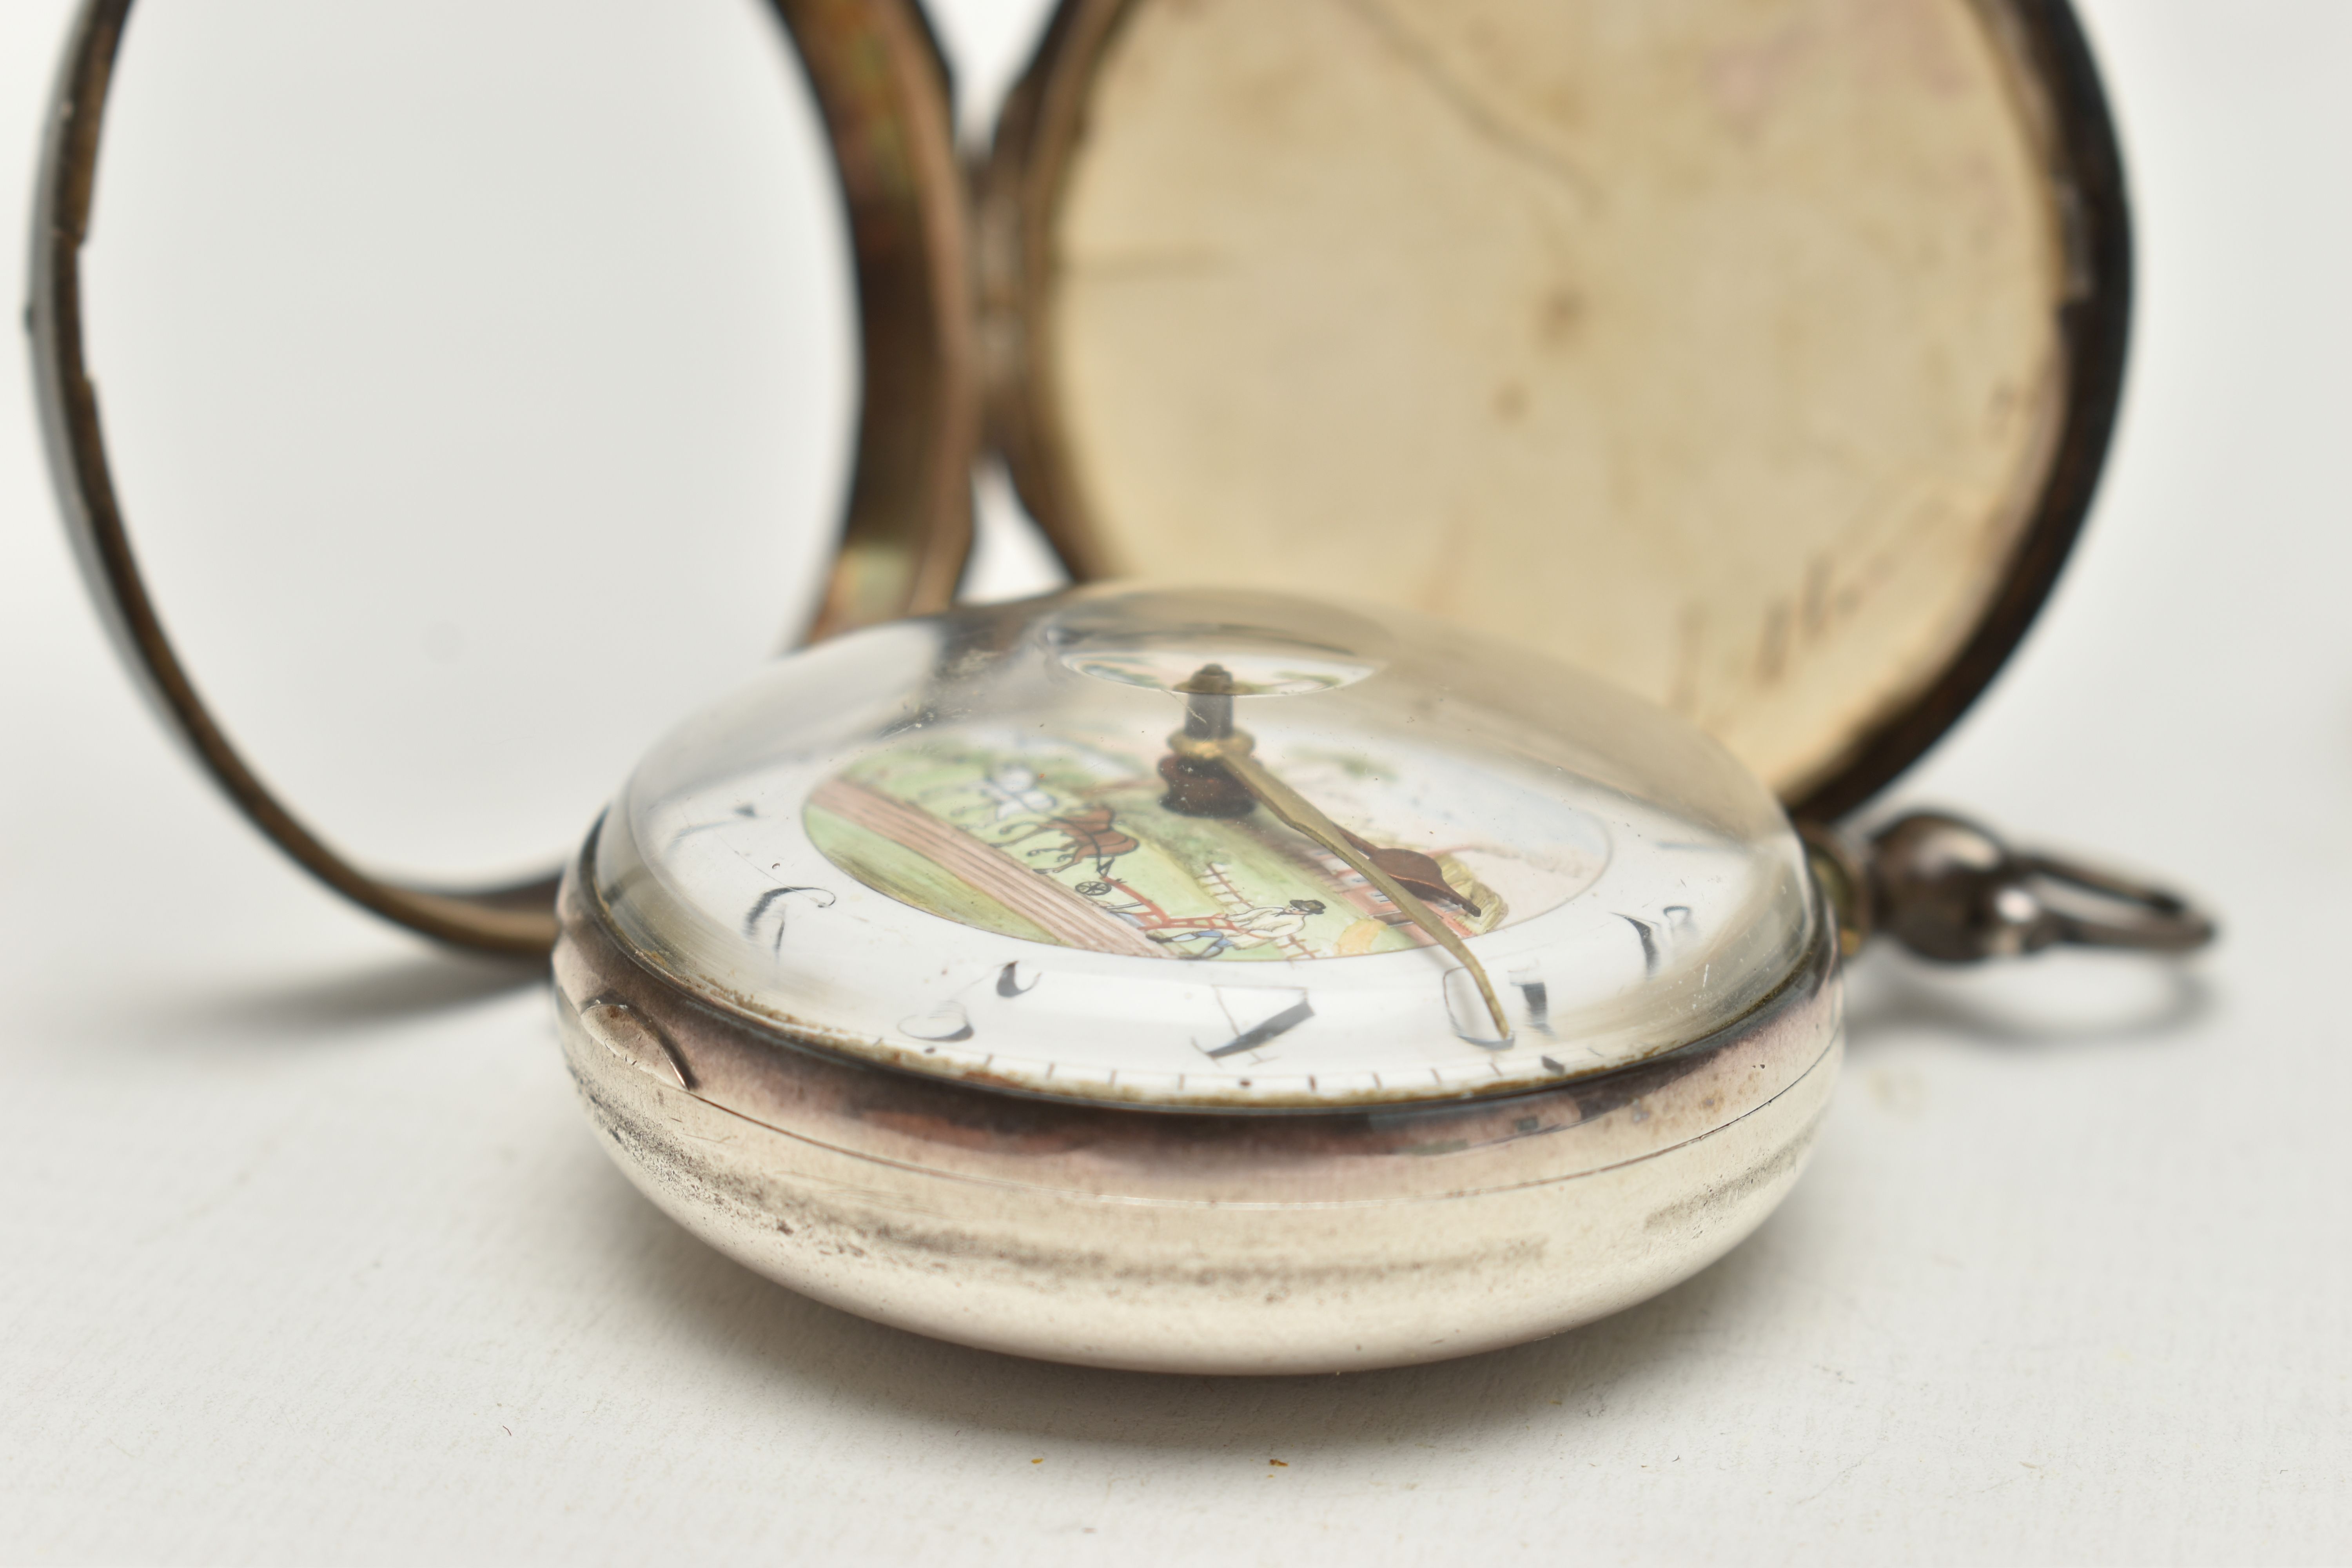 A GEORGE III SILVER PAIR CASED POCKET WATCH, the white enamel dial with Arabic numerals, painted - Image 5 of 9